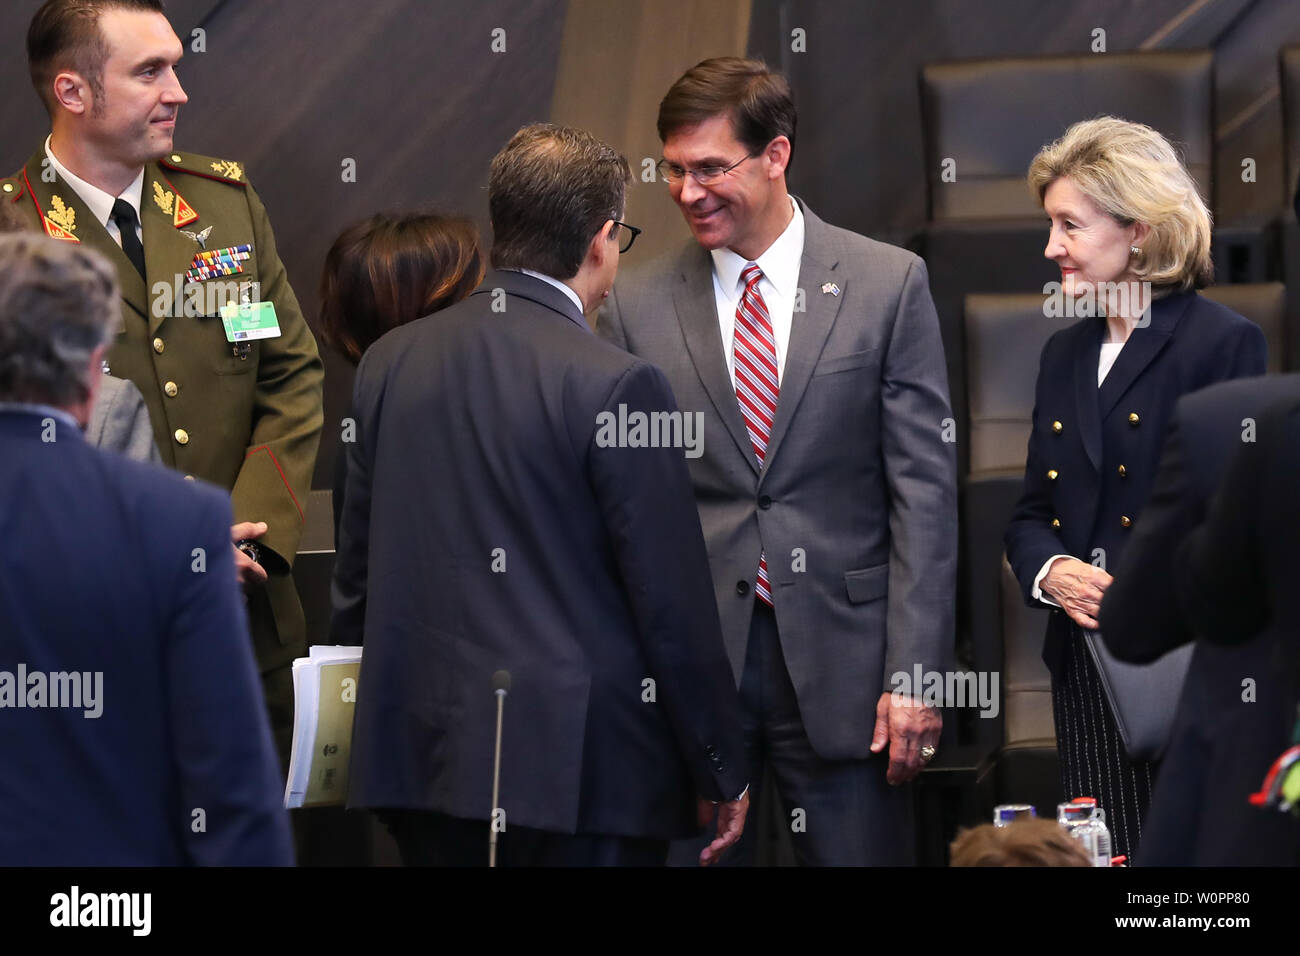 Brussels, Belgium. 27th June, 2019. U.S. Acting Secretary of Defense Mark Esper (2nd R) attends a NATO defense ministers meeting at NATO headquarters in Brussels, Belgium, on June 27, 2019. The two-day NATO defense ministers meeting closed on Thursday. Credit: Zhang Cheng/Xinhua/Alamy Live News Stock Photo